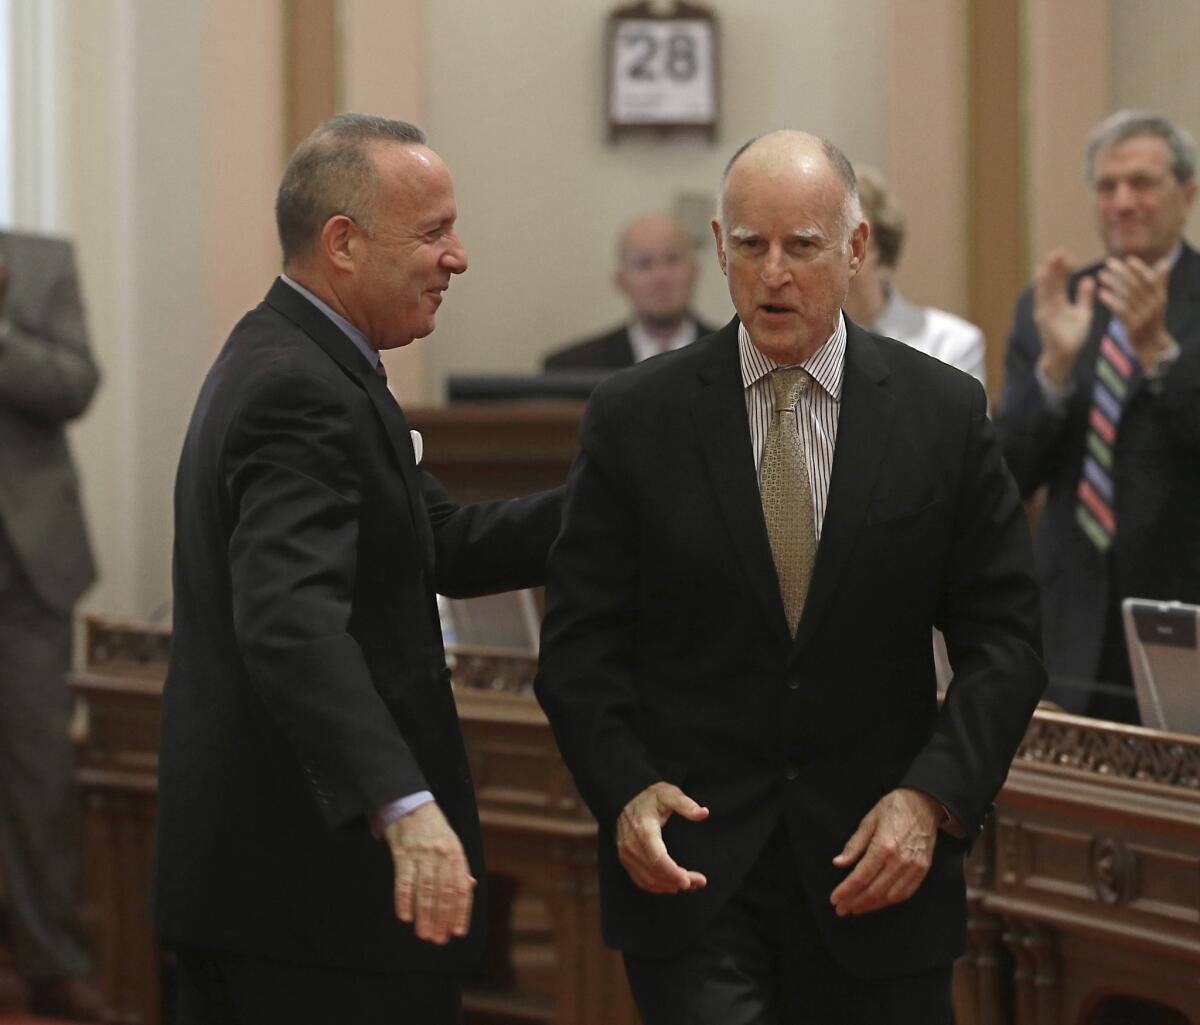 Senate President Pro Tem Darrell Steinberg (D-Sacramento), left, thanks Gov. Jerry Brown during a ceremony honoring Steinberg, who is leaving the Senate due to term limits.